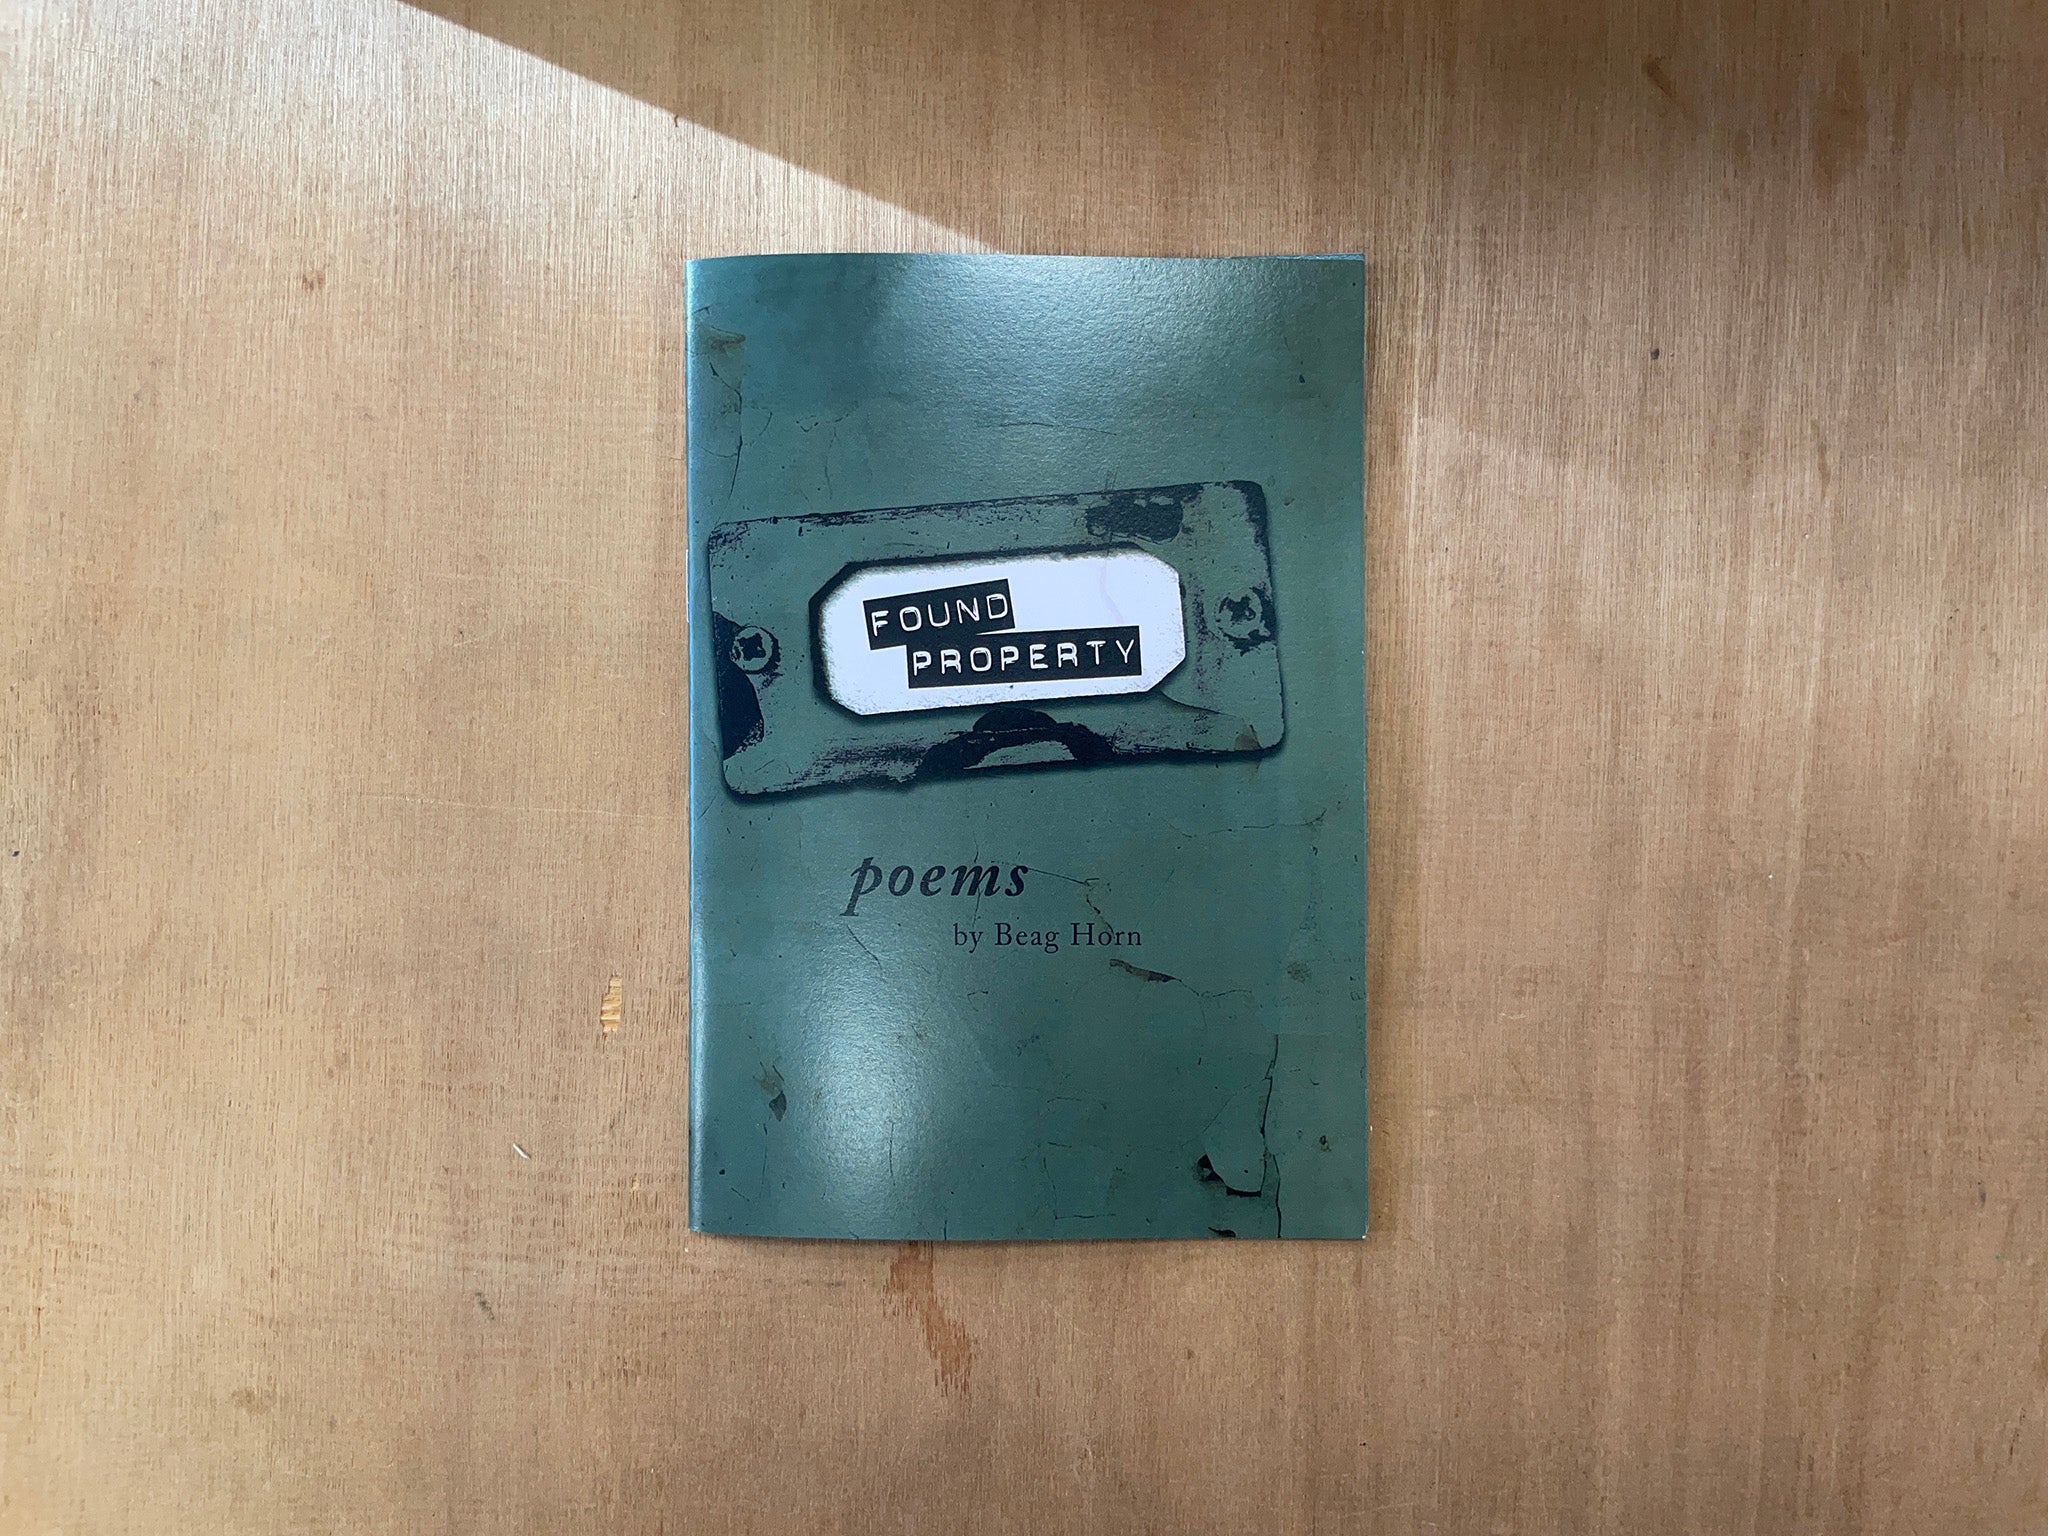 FOUND PROPERTY: POEMS by Beag Horn